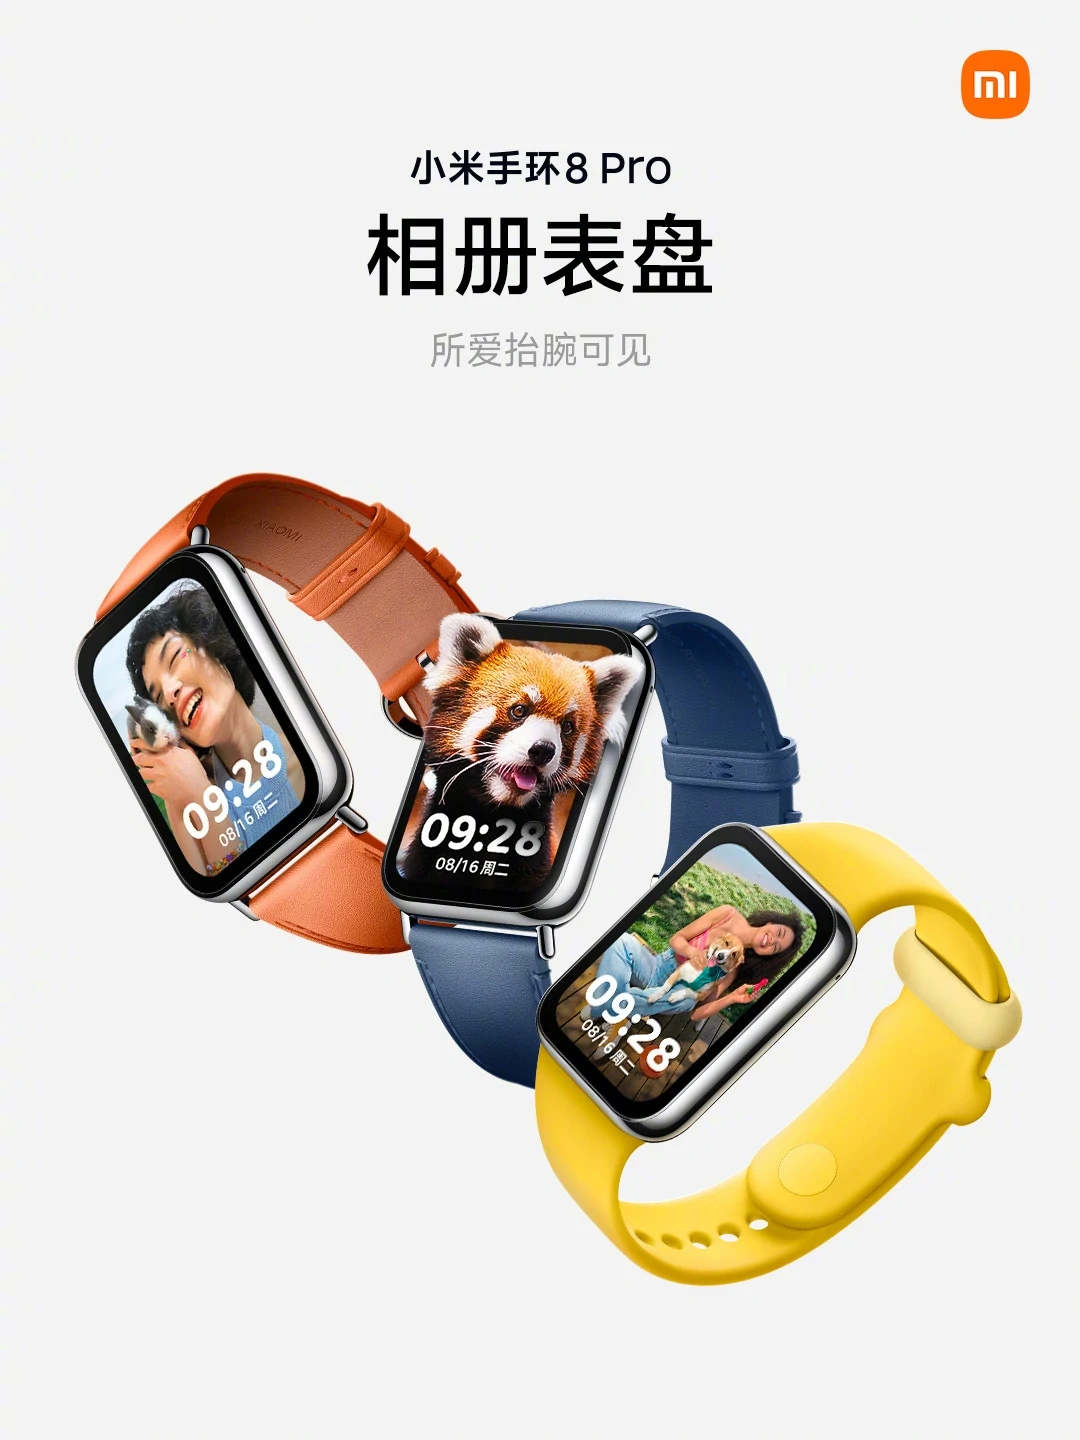 Xiaomi Band 8 Pro to be launched on August 14 with 1.74-inch 60Hz display,  new design, GPS